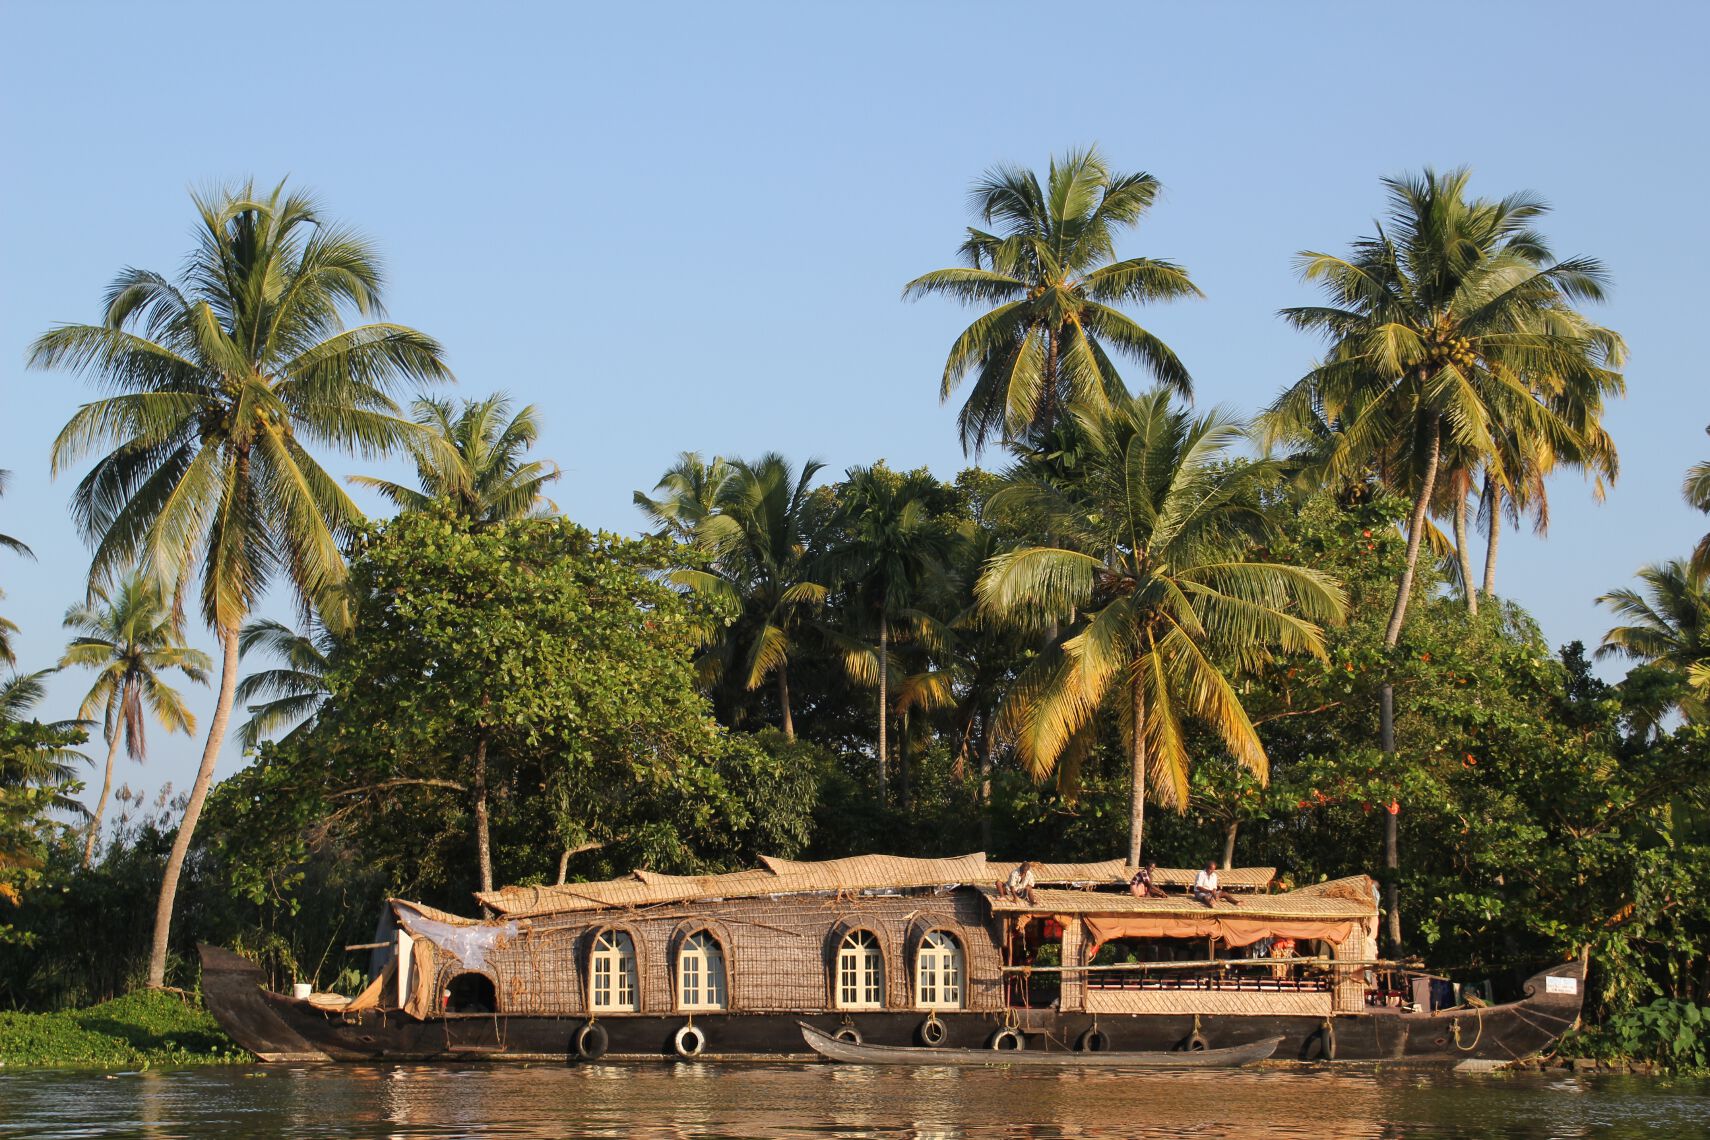 A houseboat sits on the Backwaters in Kerala, India.